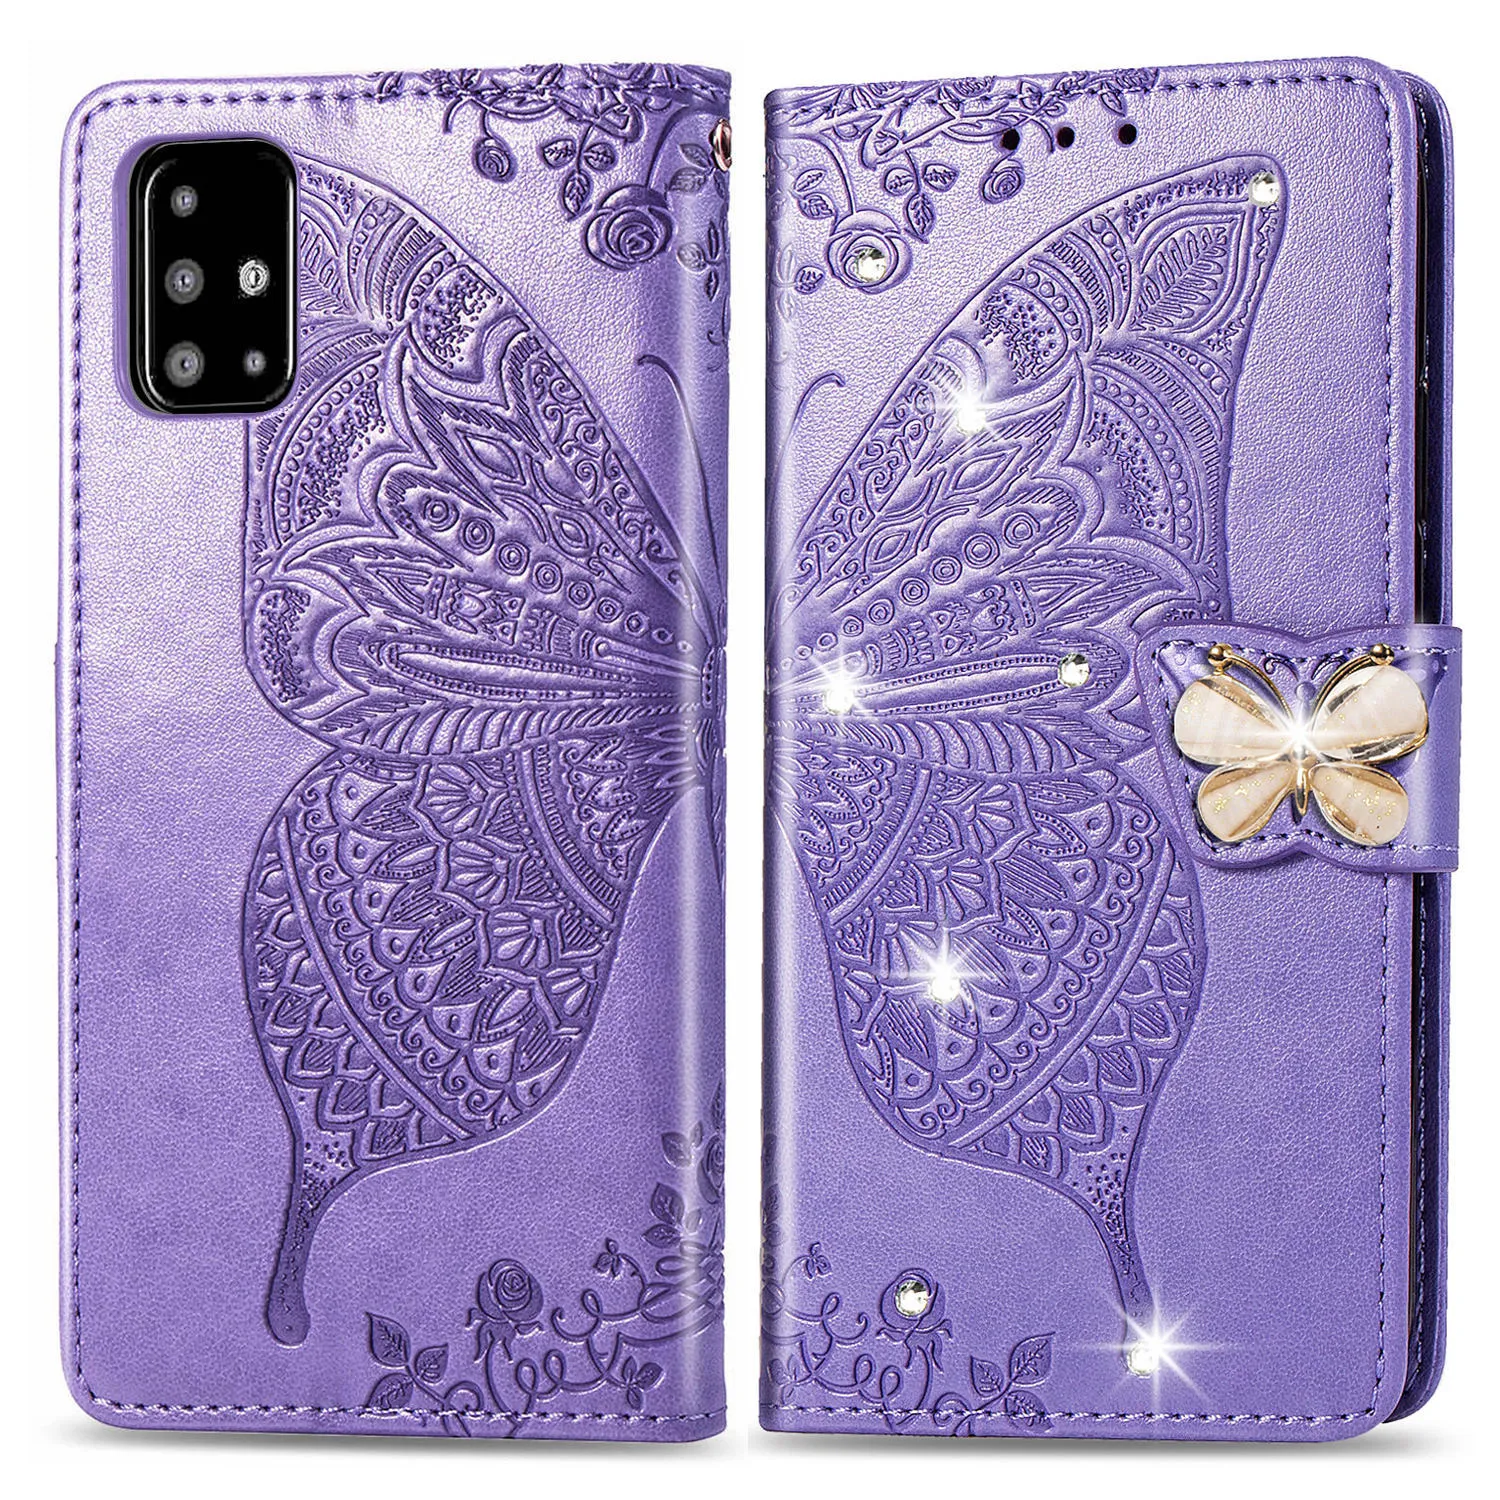 Flip Leather Butterfly Embossing Wallet Cases For Samsung A01 A02 A02S A03S A10 A11 A12 A21S A22 A31 A32 A41 A51 A52 A71 A72 A82